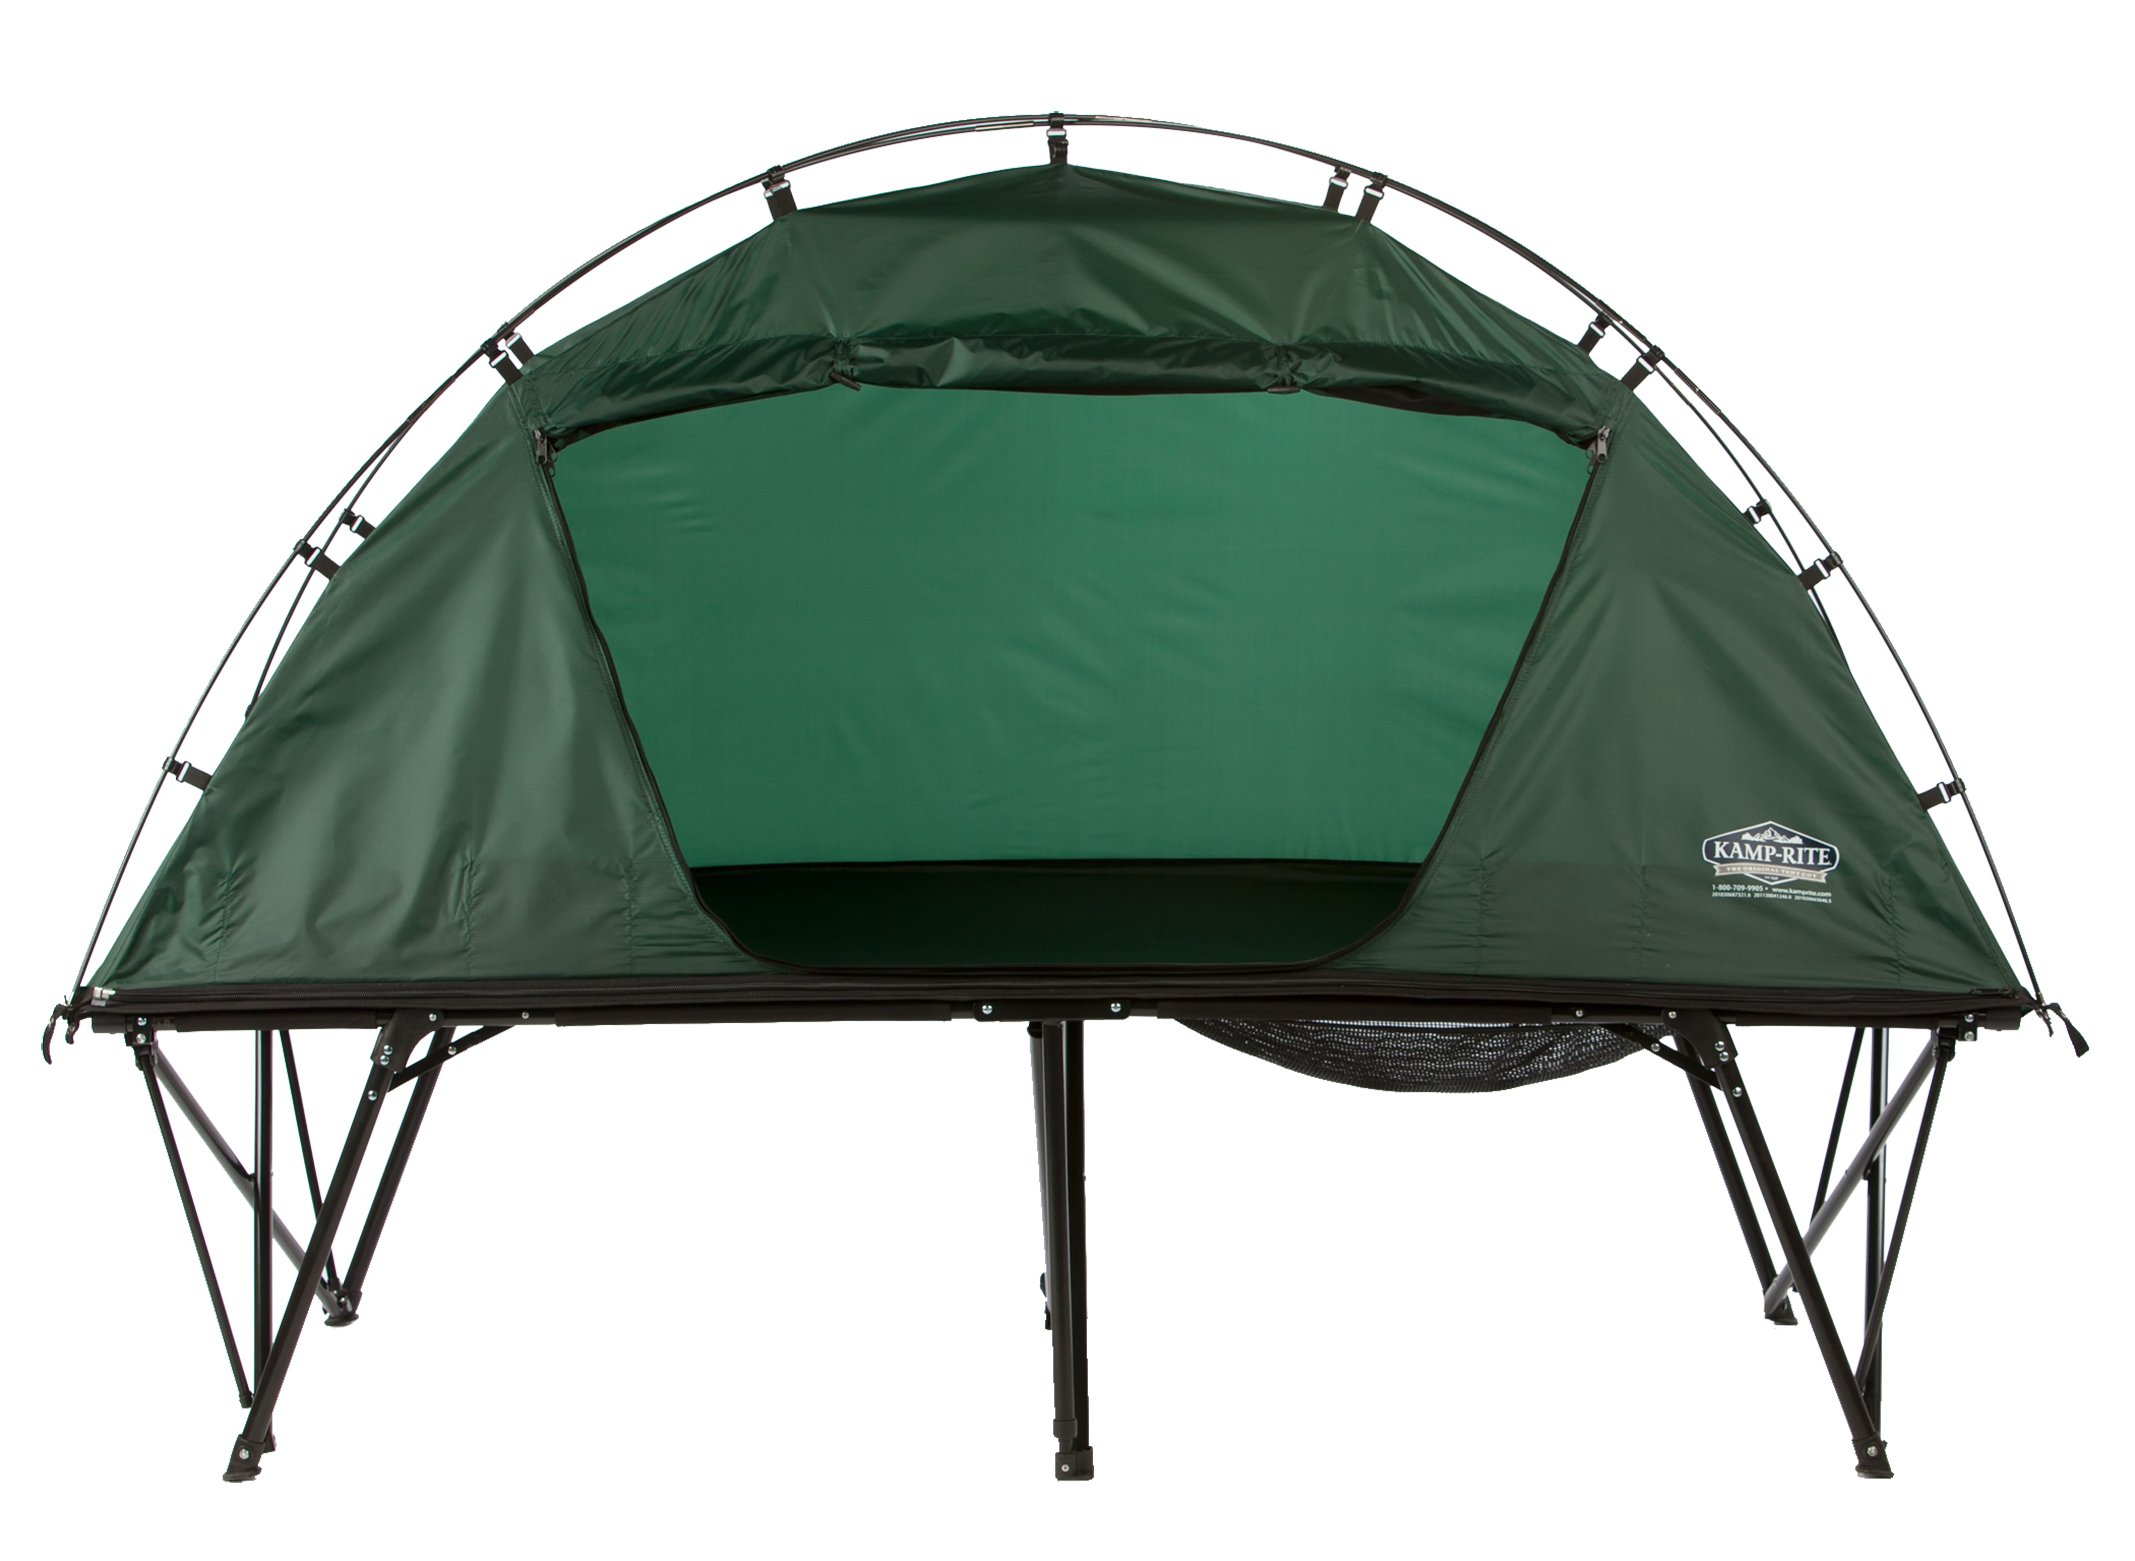 Kamp-Rite - Extra Large Elevated Collapsible Compact 1 Person Tent Cot, 3 in 1 Sleeping Tent Cot with Roller Bag and Rain Fly, Easy Setup, Green